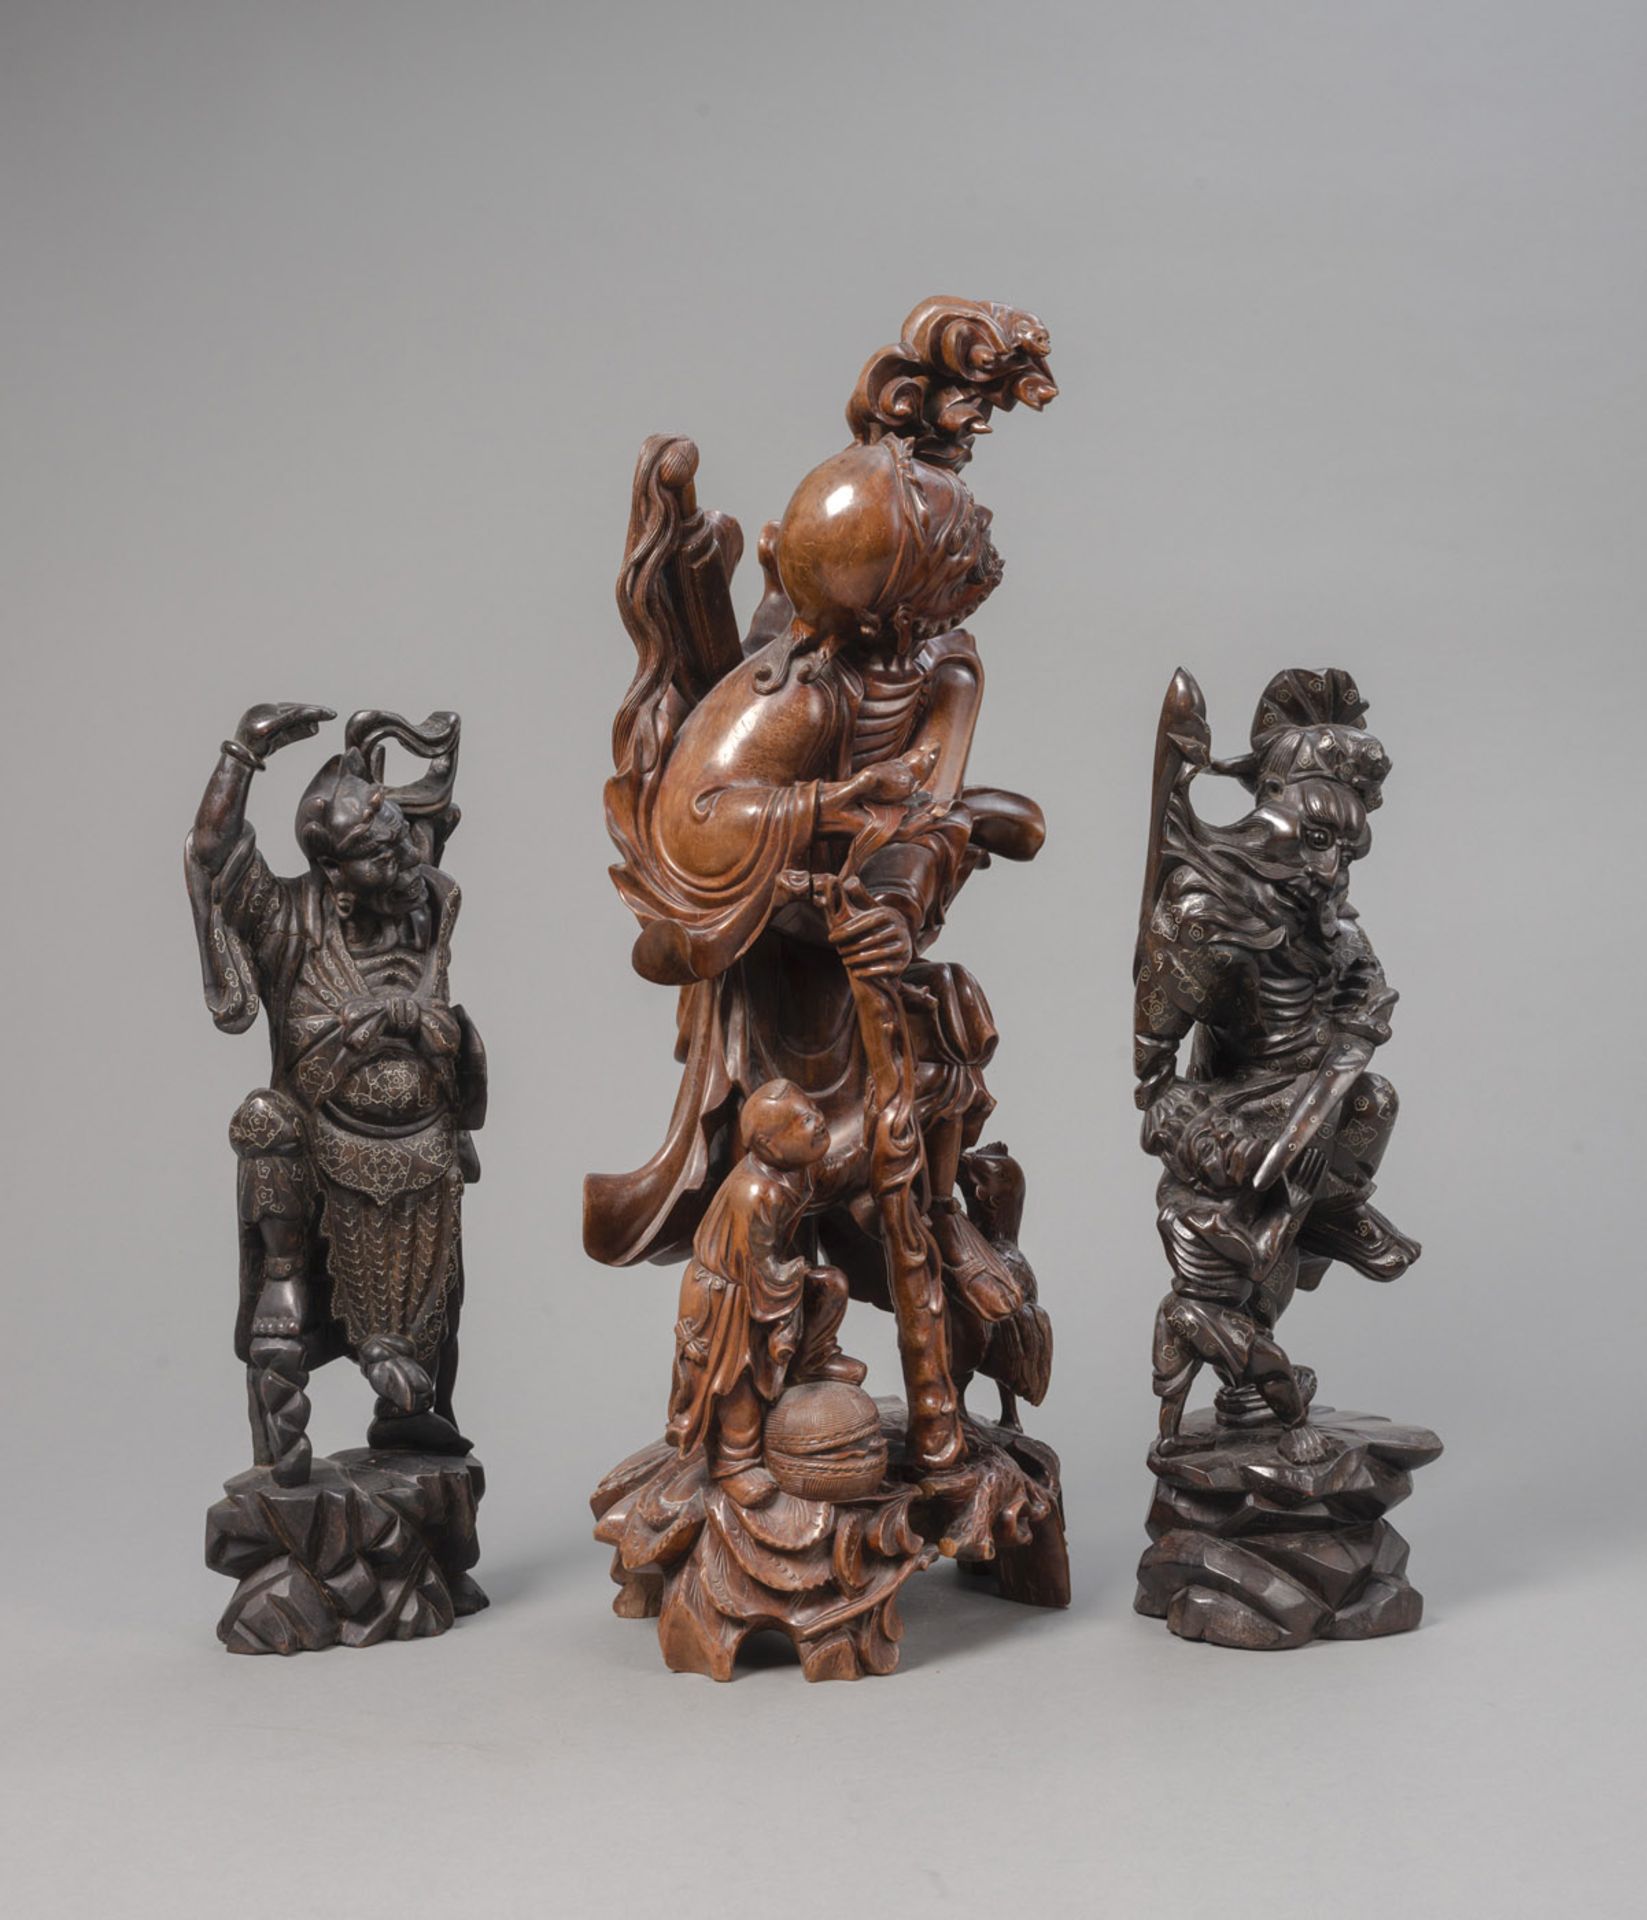 THREE WOOD CARVINGS OF TAOIST FIGURES, INCLUDING LI TIEGUAI AND ZHONG KUI, PARTLY INLAID WITH METAL - Image 2 of 5